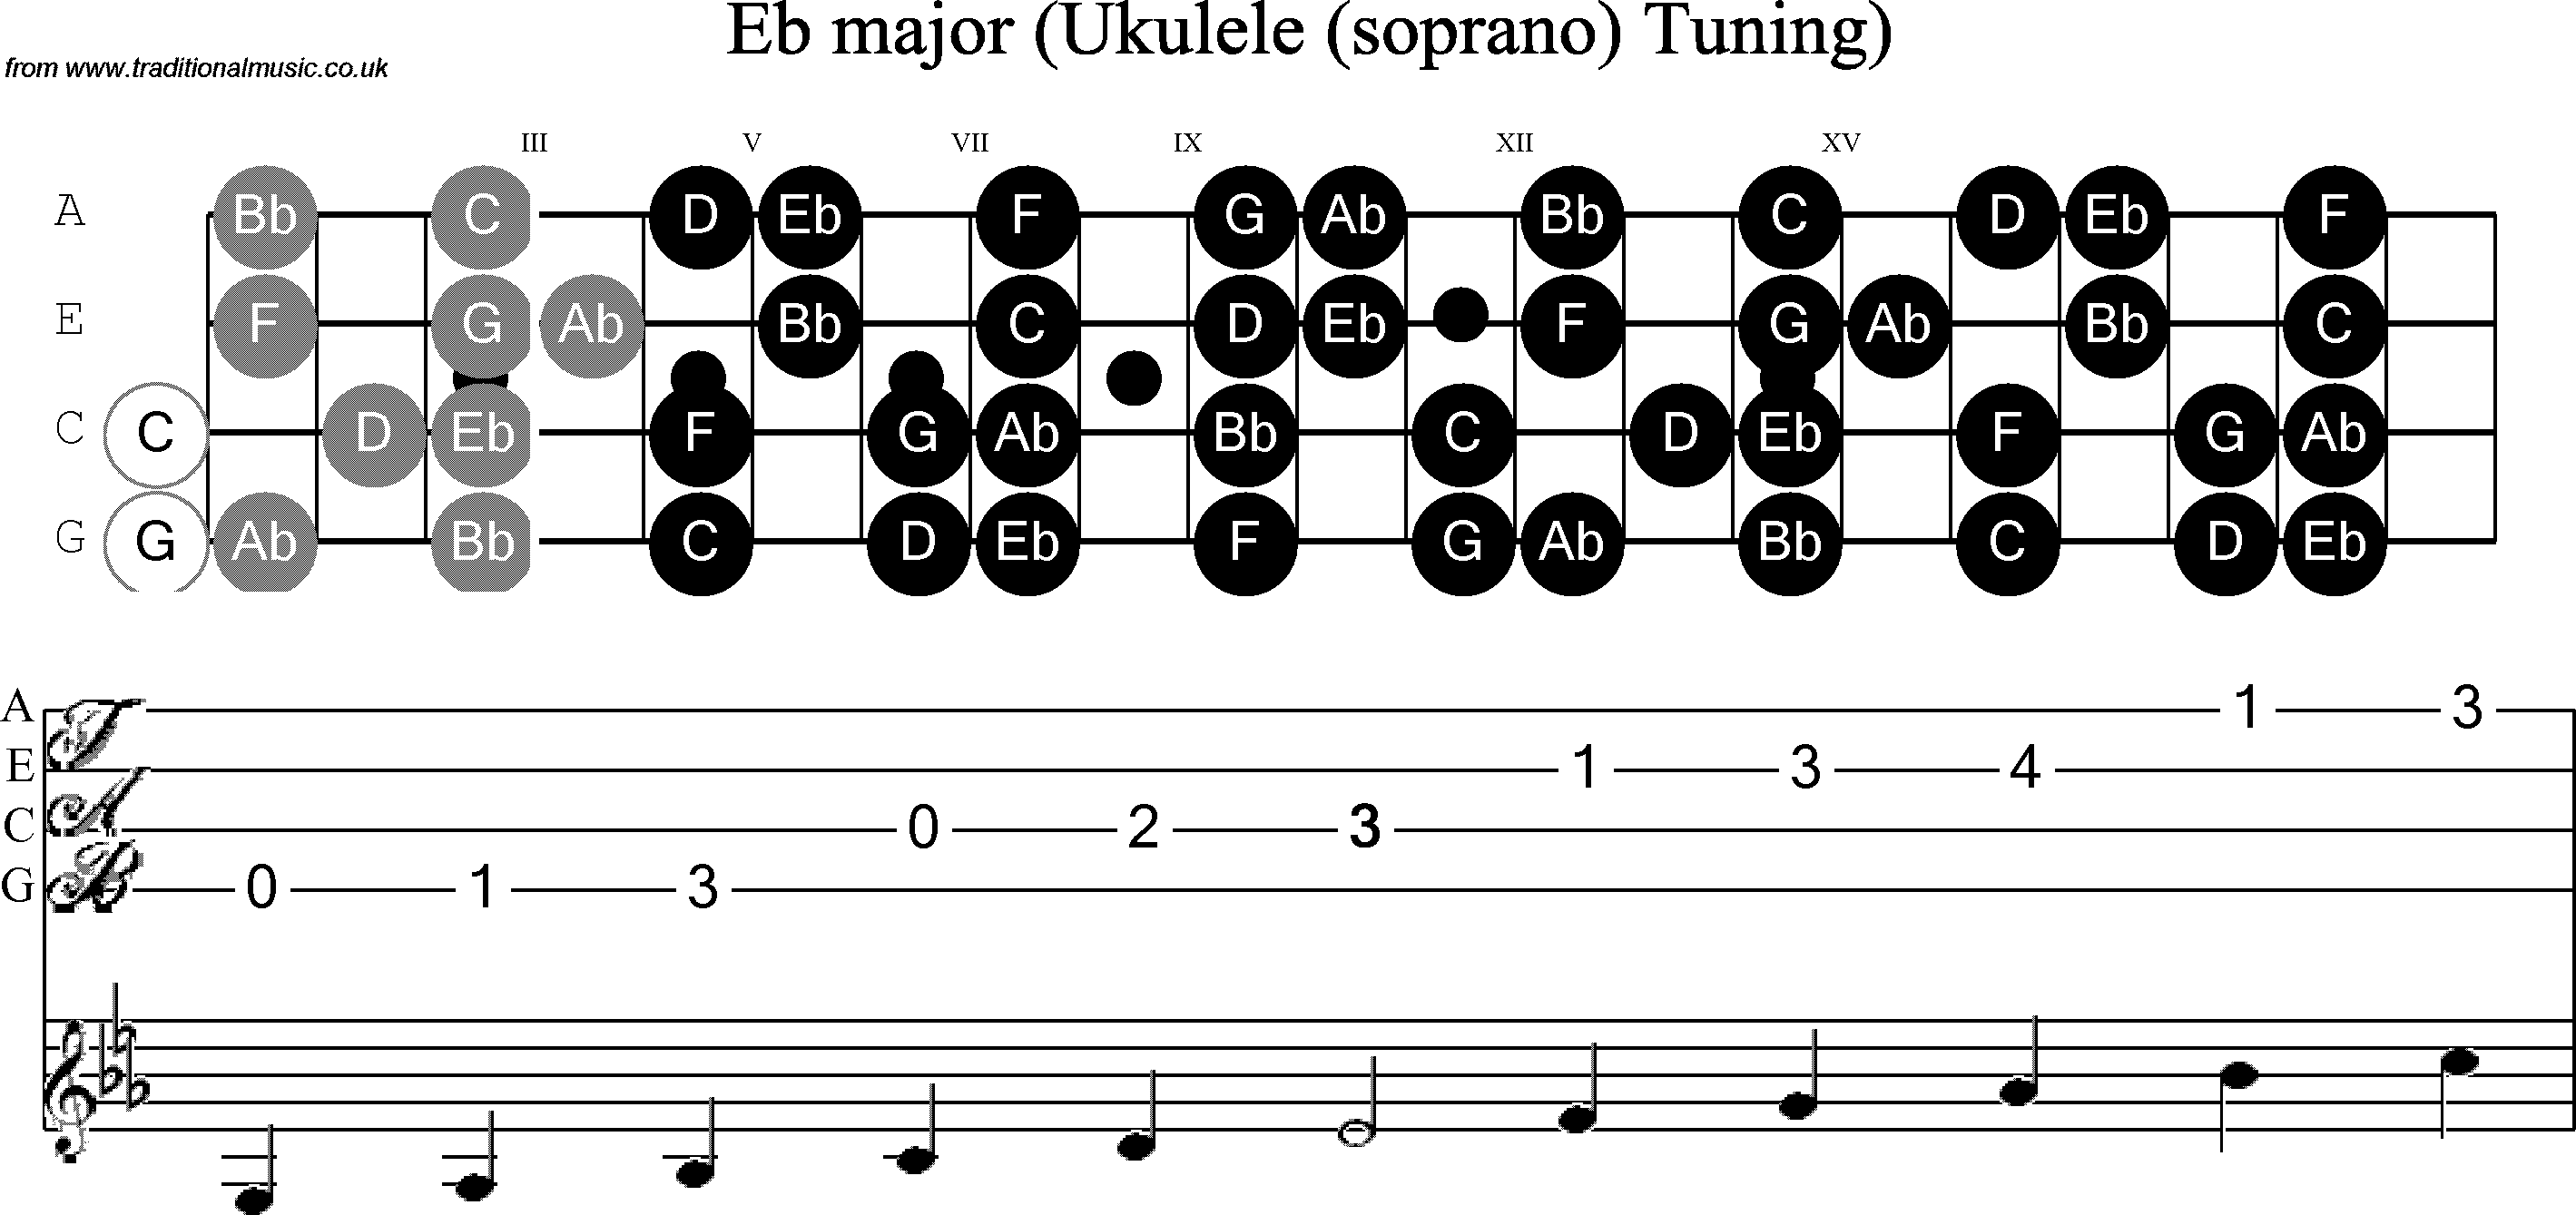 Scale, stave and neck diagram for Ukulele Eb